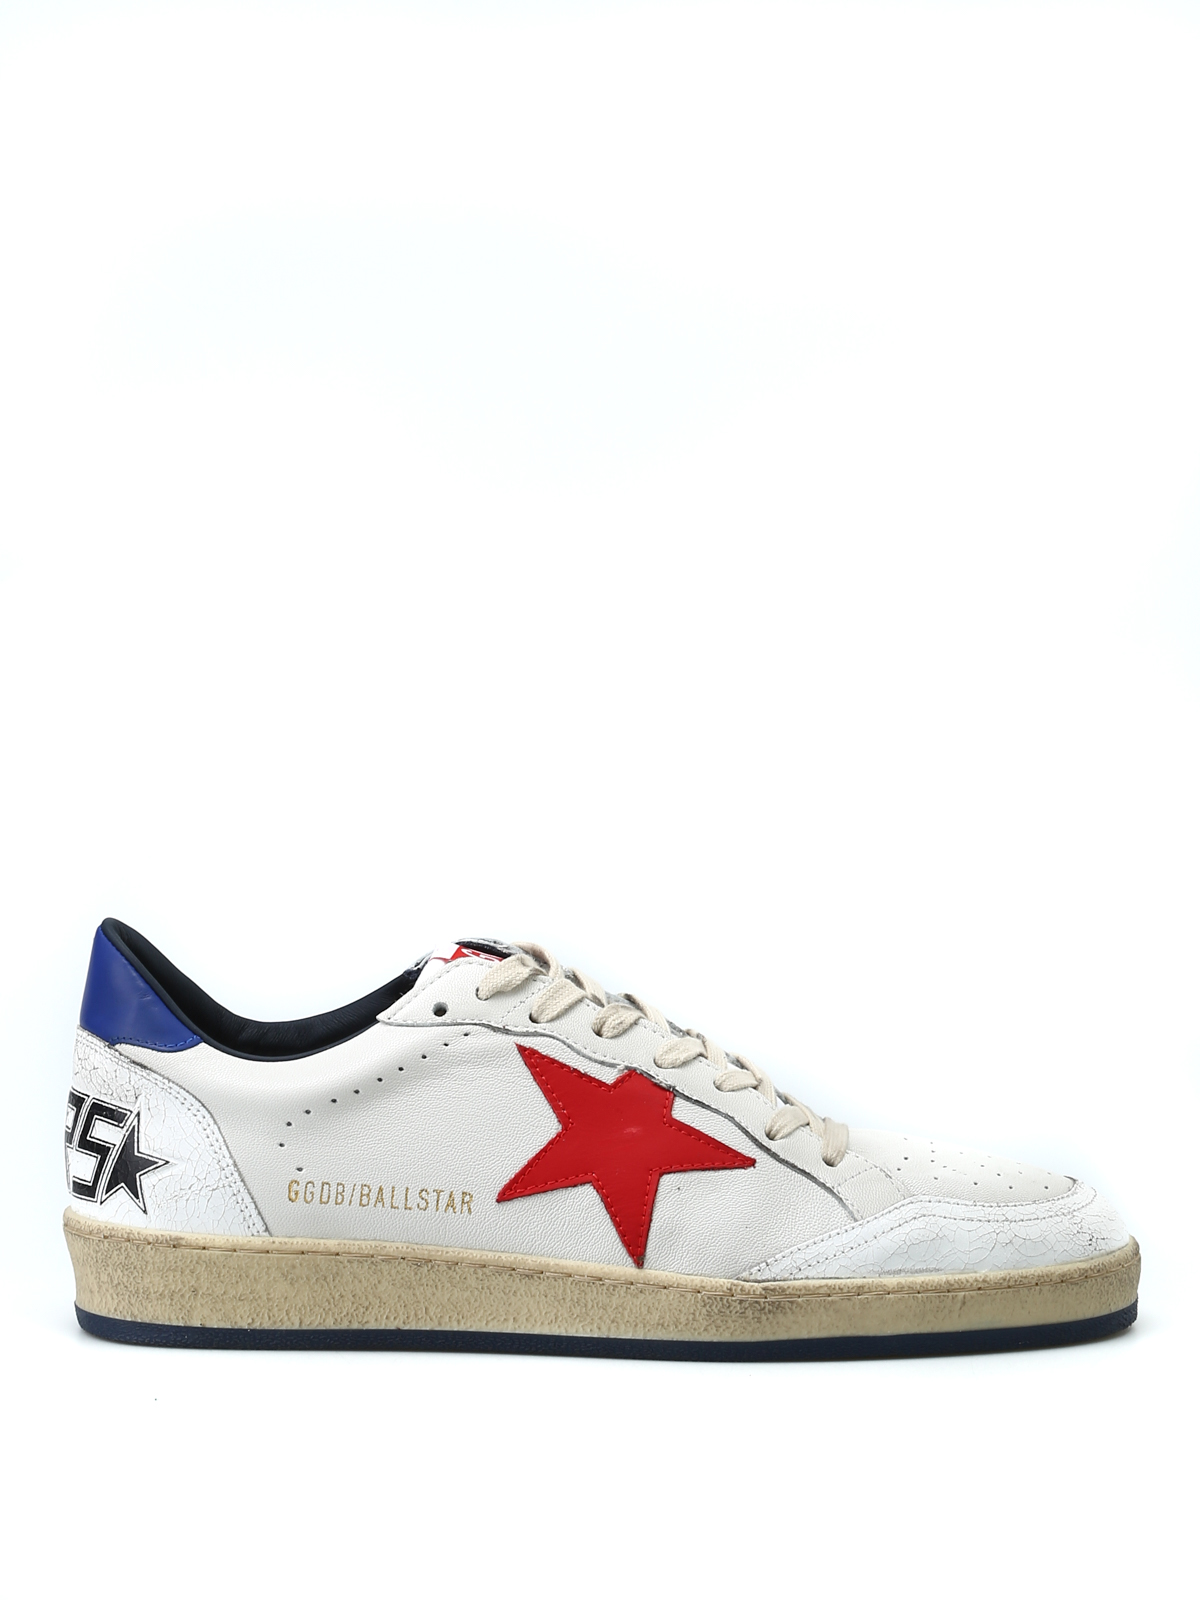 Golden Goose - Sneaker bianche Ball Star con stella rossa - sneakers -  G33MS592H8